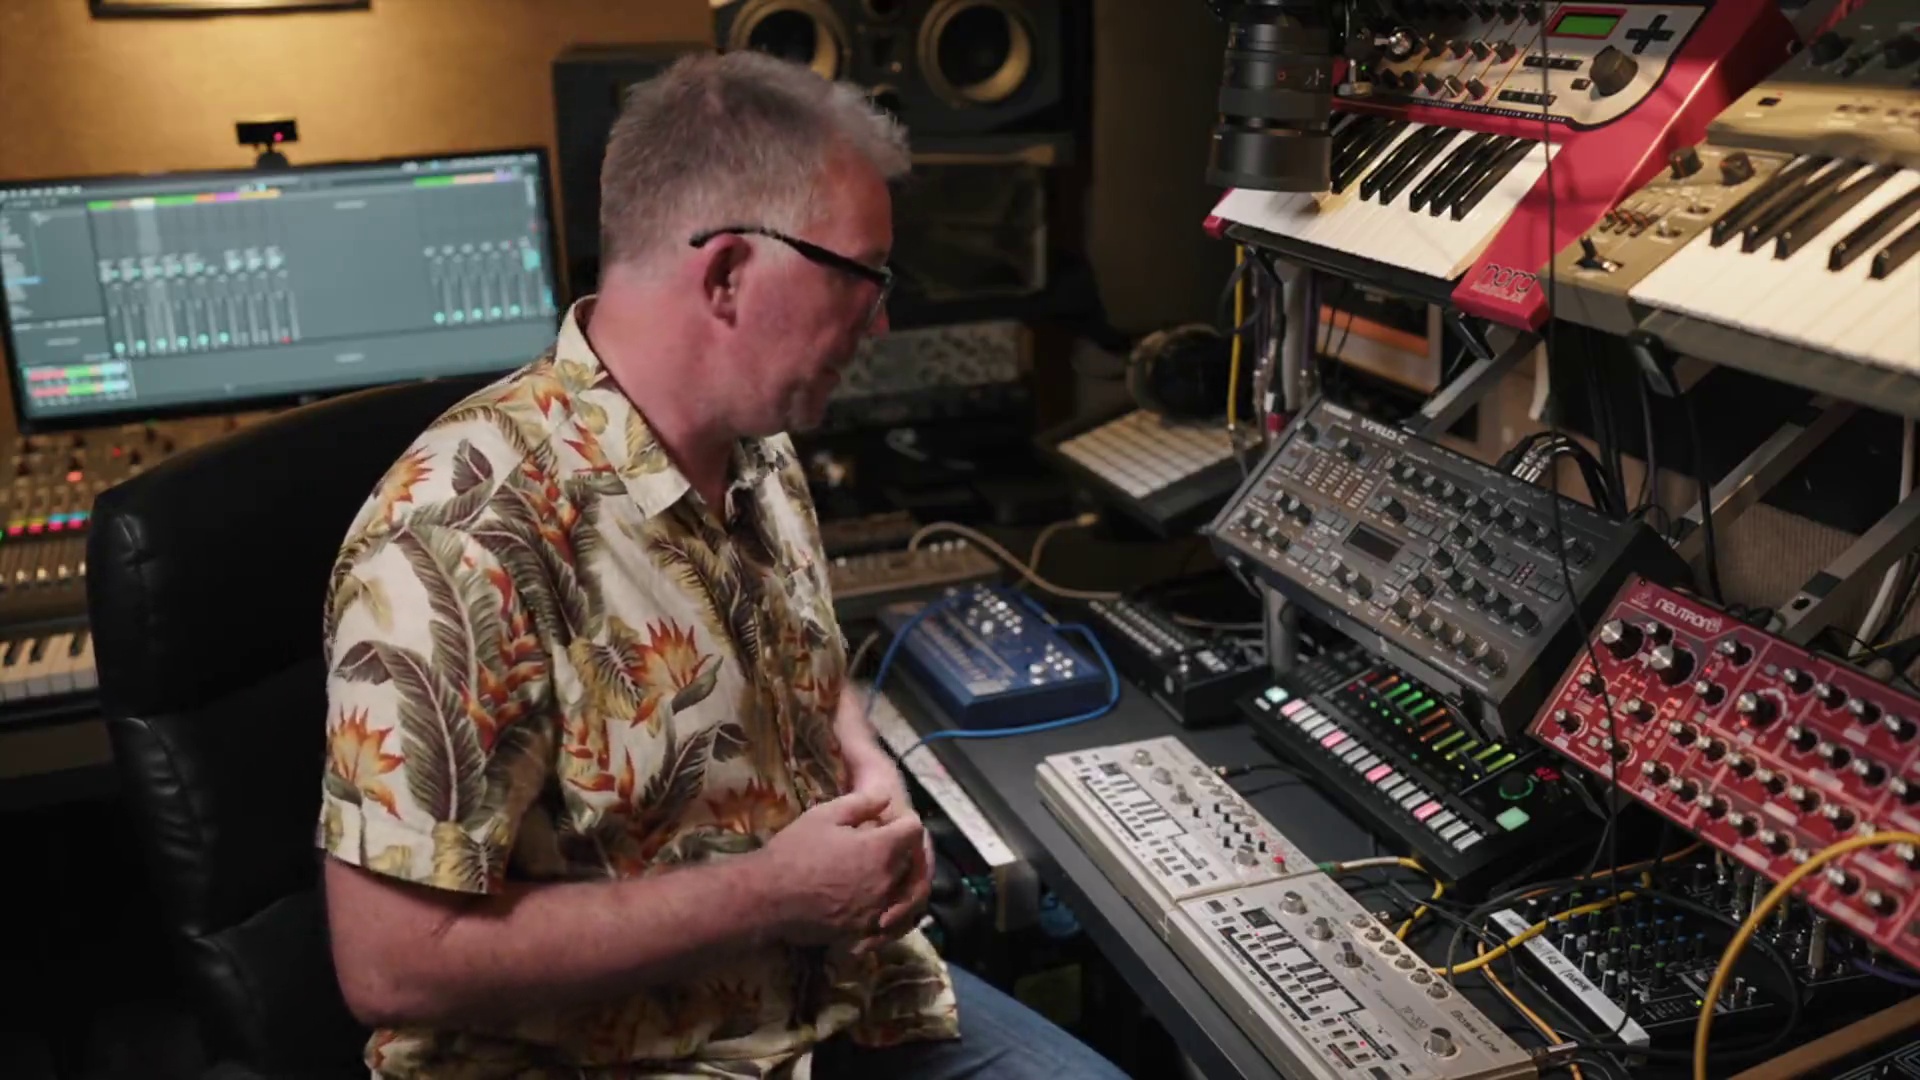 D.A.V.E. The Drummer – The TB-303 Demystified